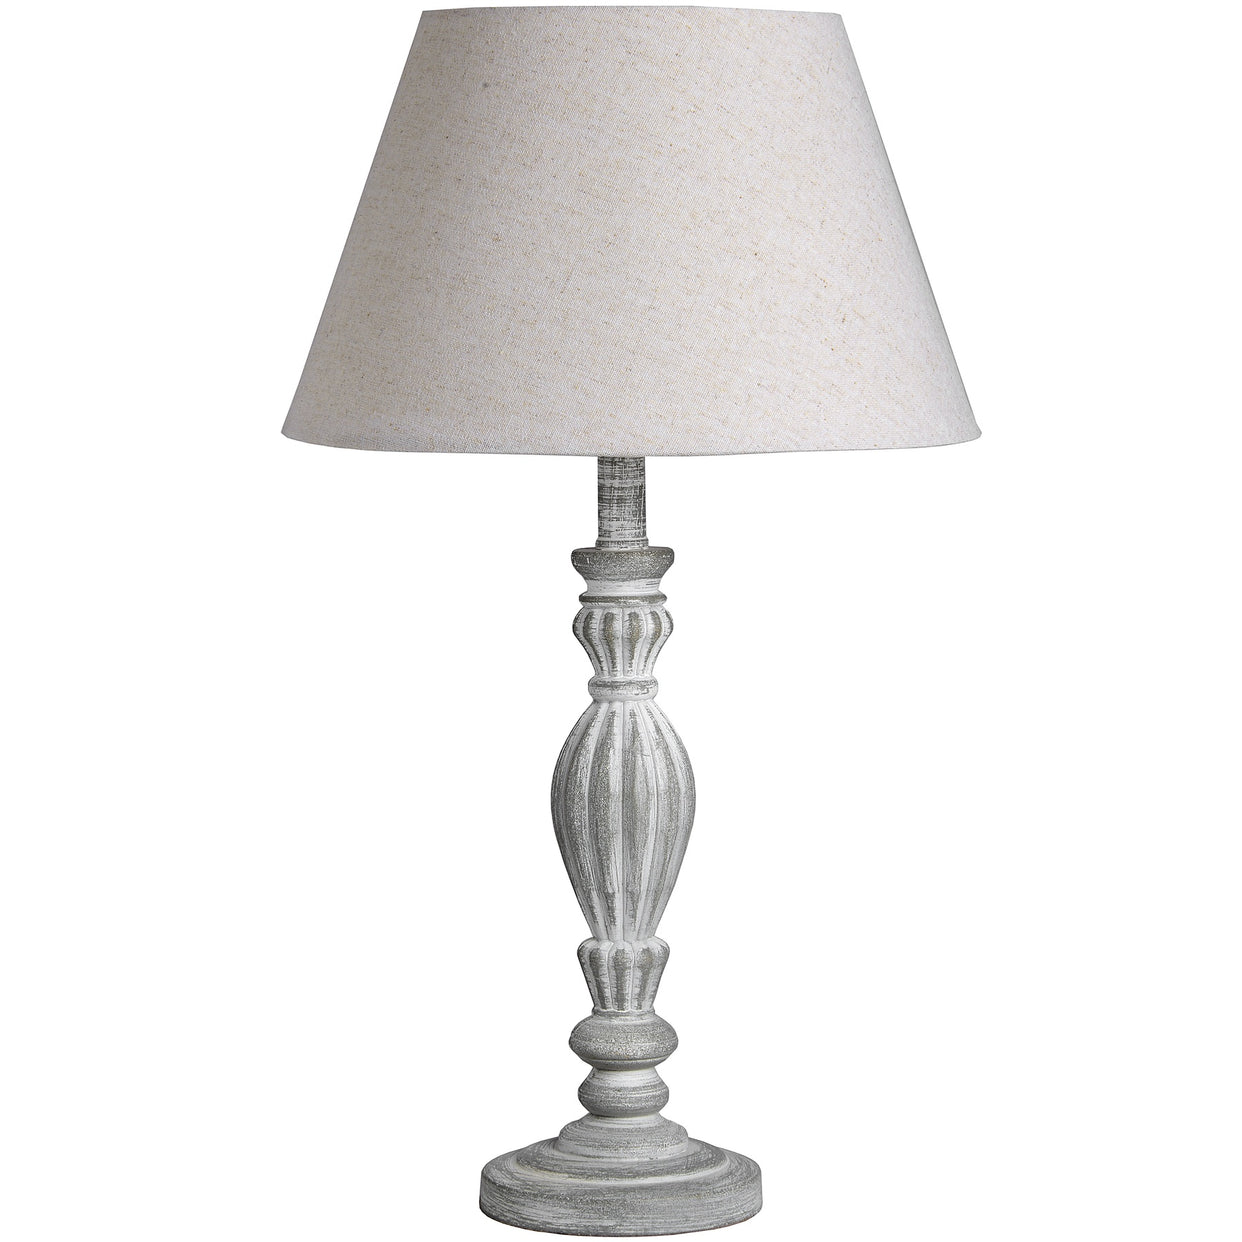 Aegina Wooden Beigetable Lamp For Hill Interiors - HIL-16291